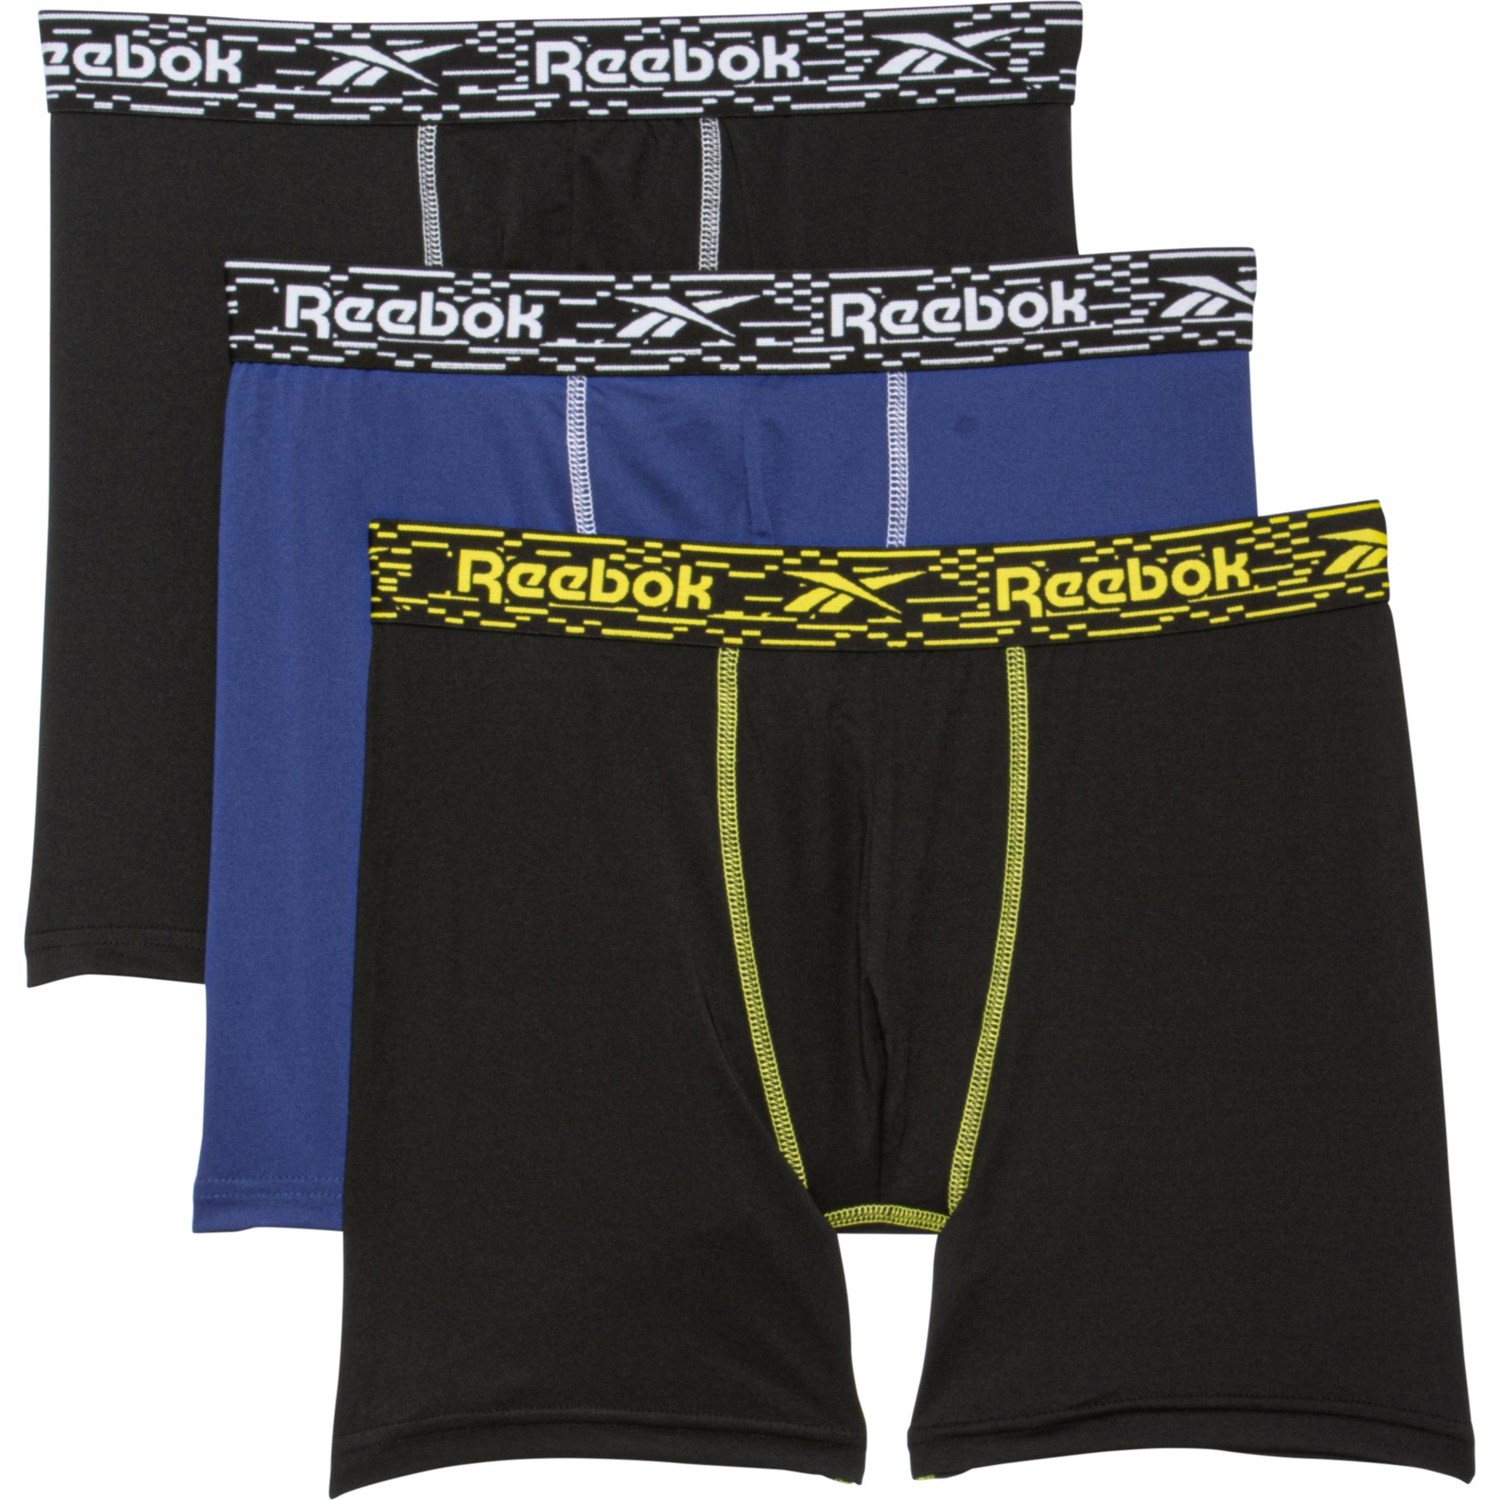 Reebok Stretch-Performance Antimicrobial Briefs 3-Pack - Save 50%